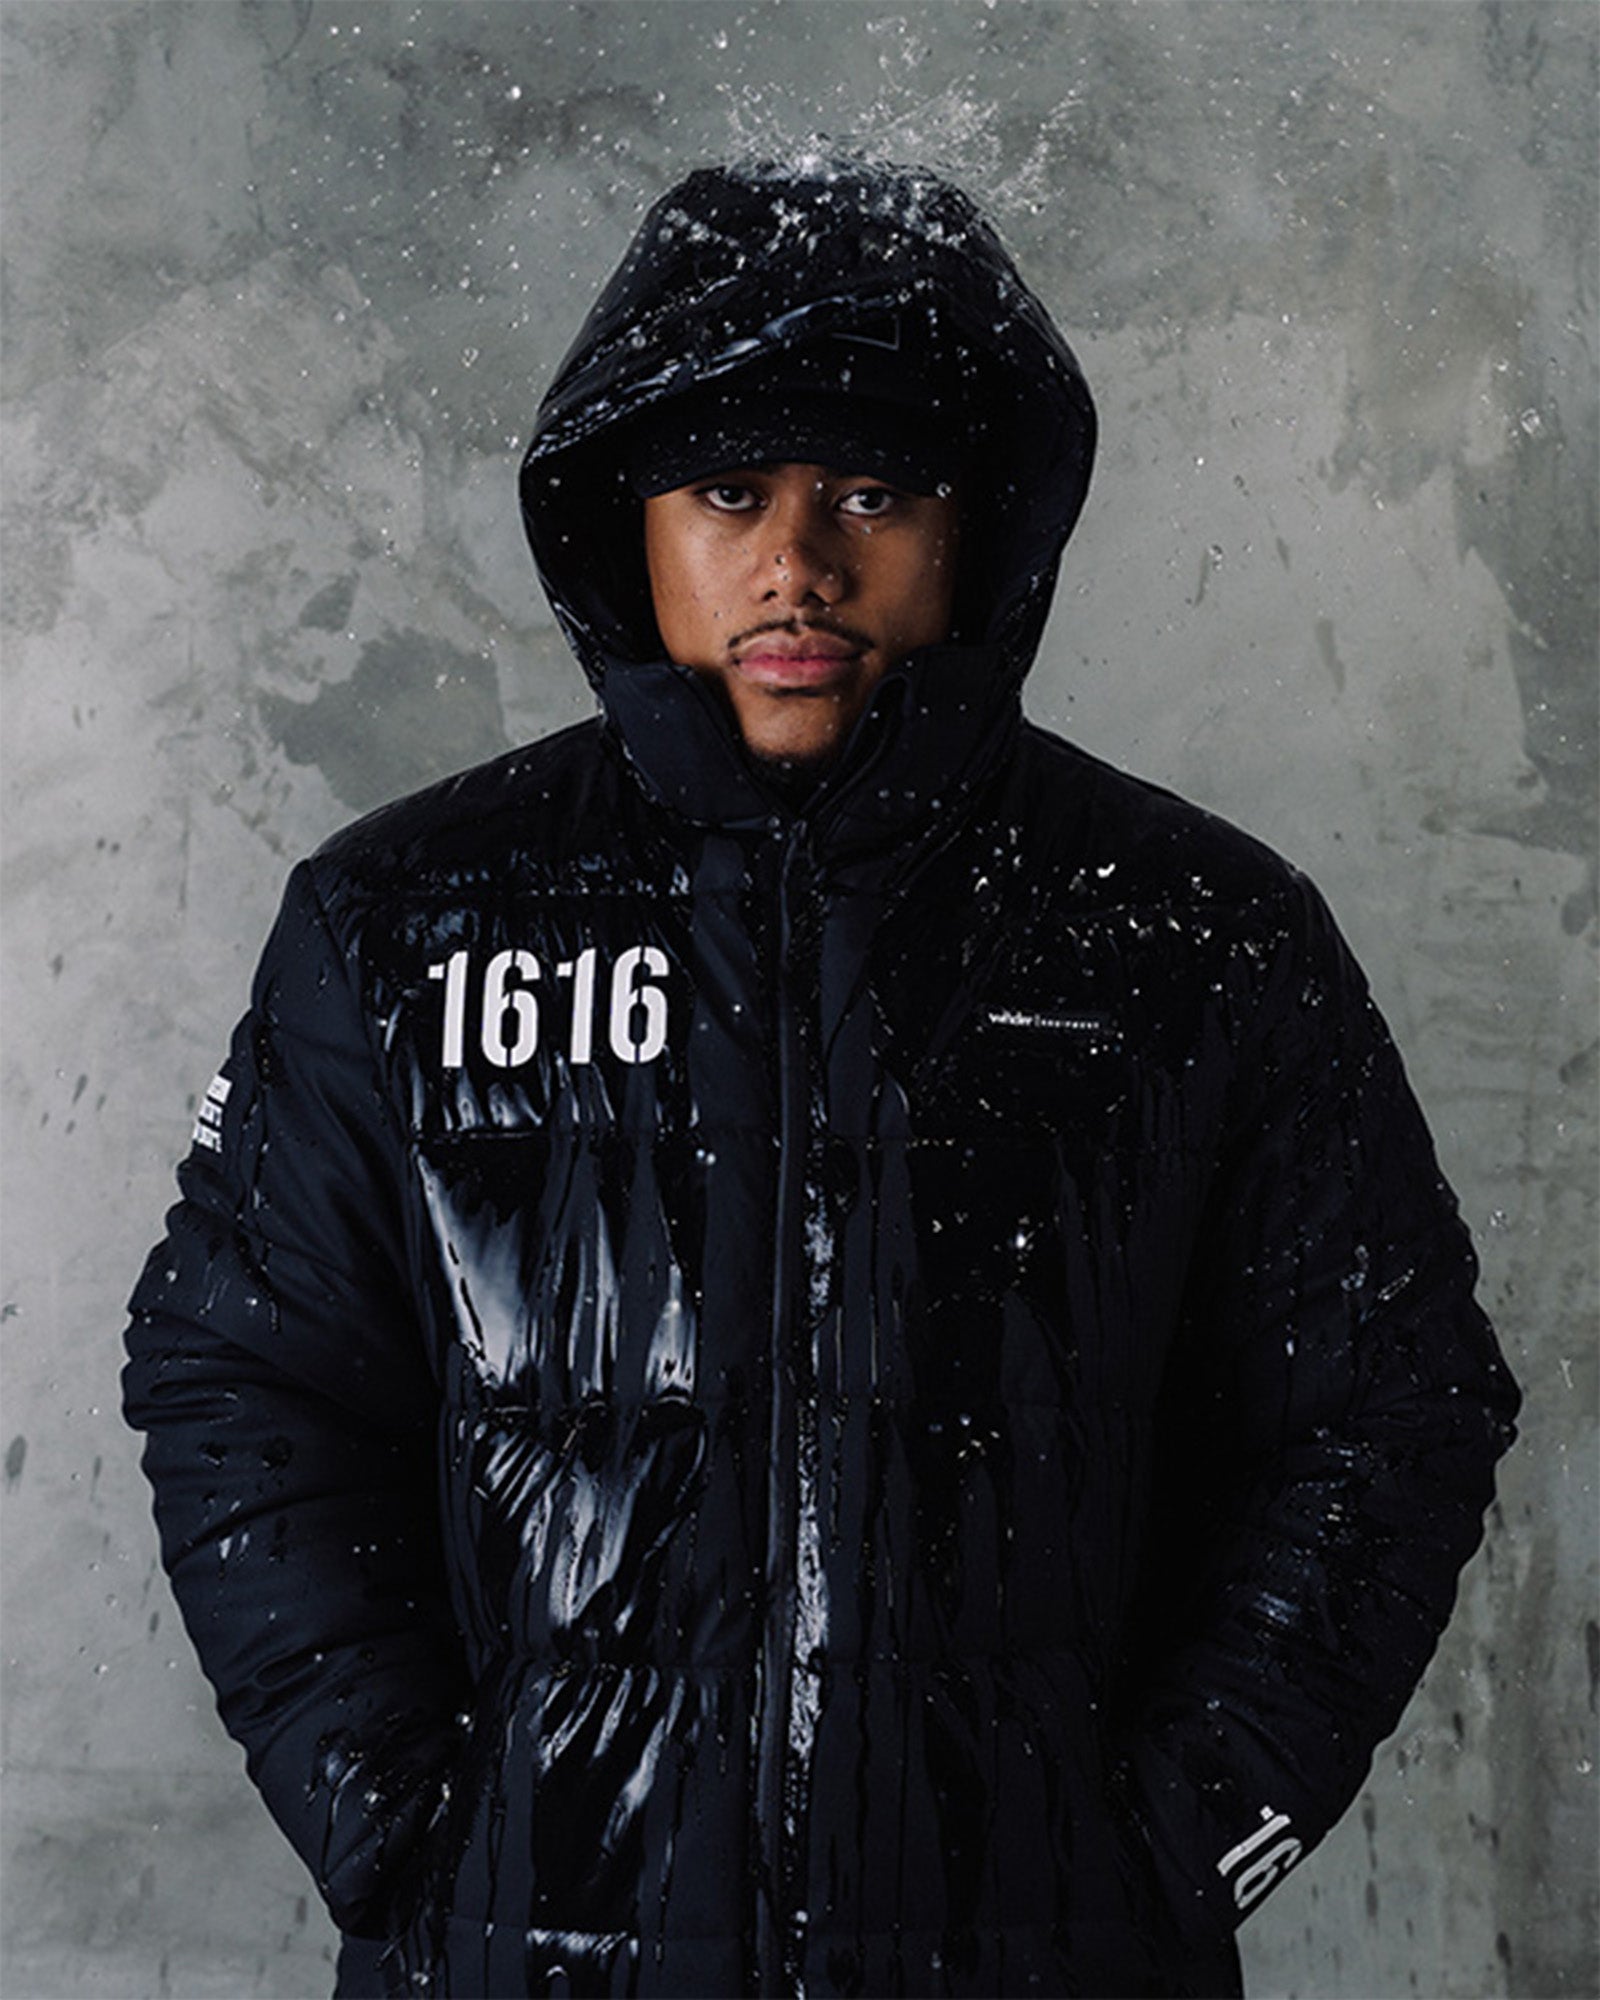 COUNT IT PUFFER JACKET - BLACK